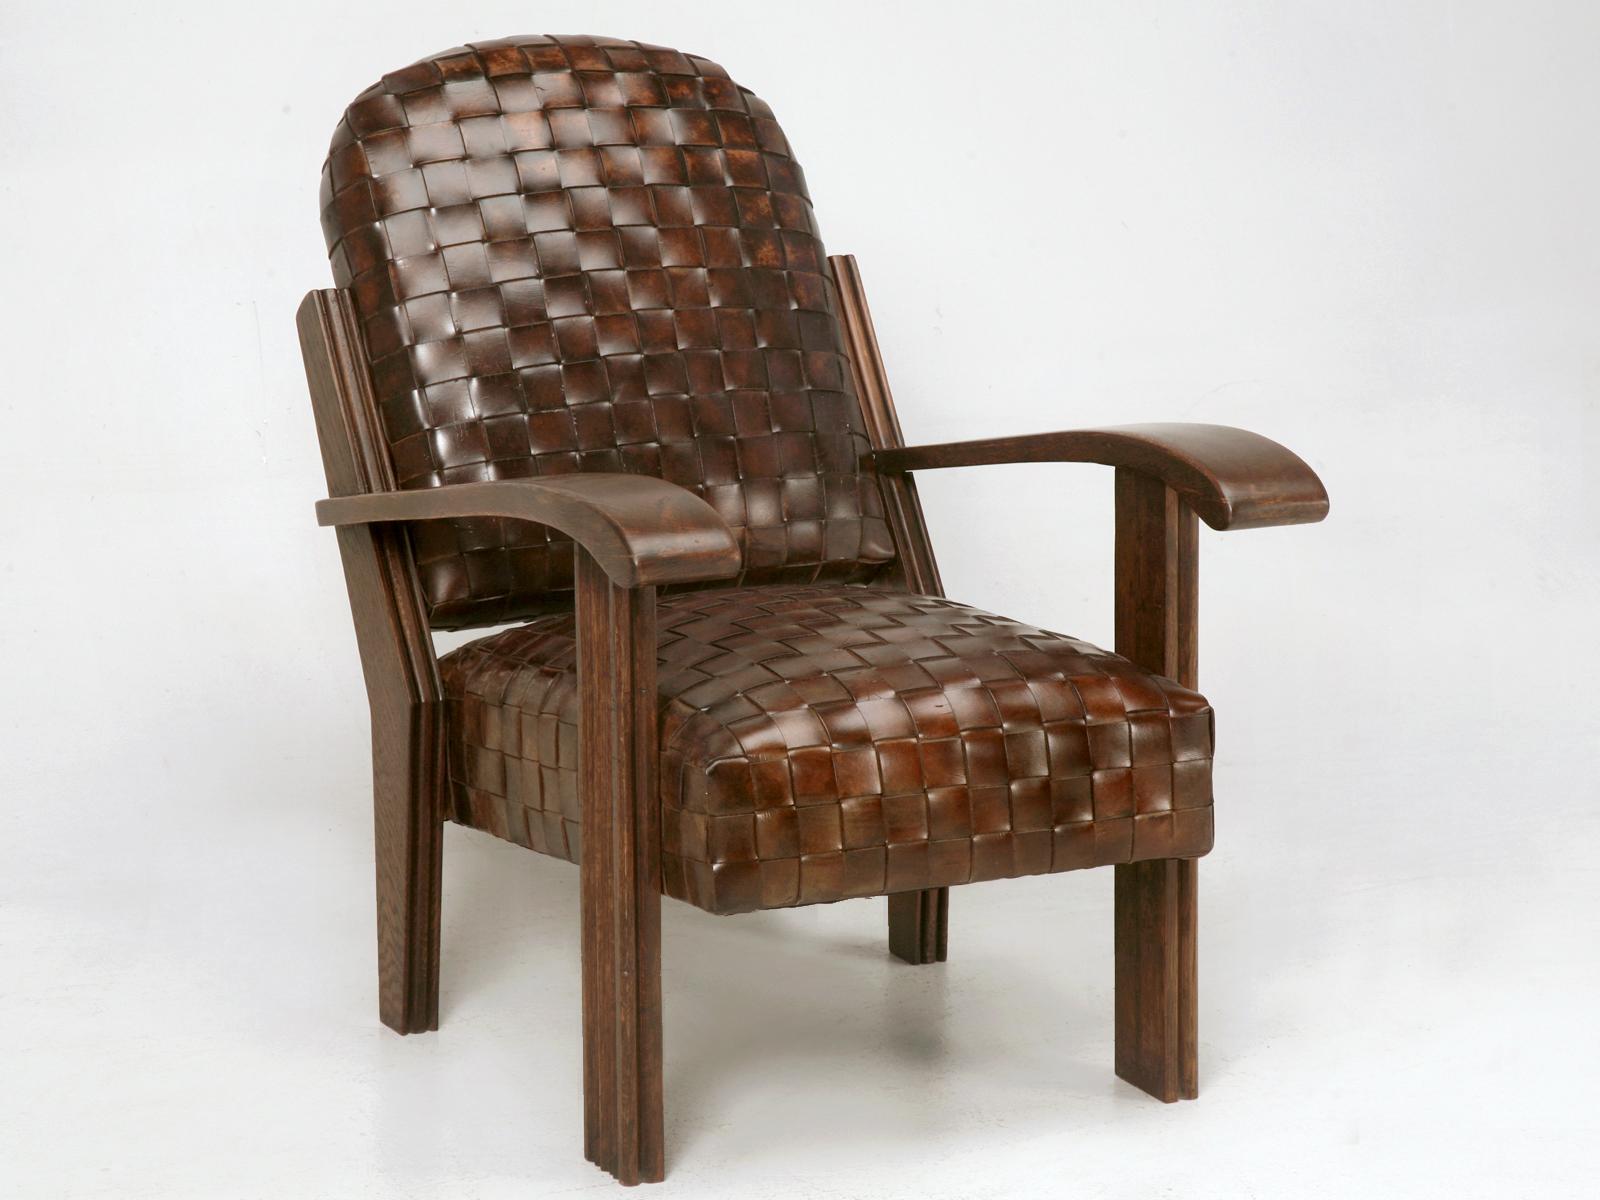 Handwoven Leather French Style Club Chair with Matching Ottoman, Optional colors For Sale 1